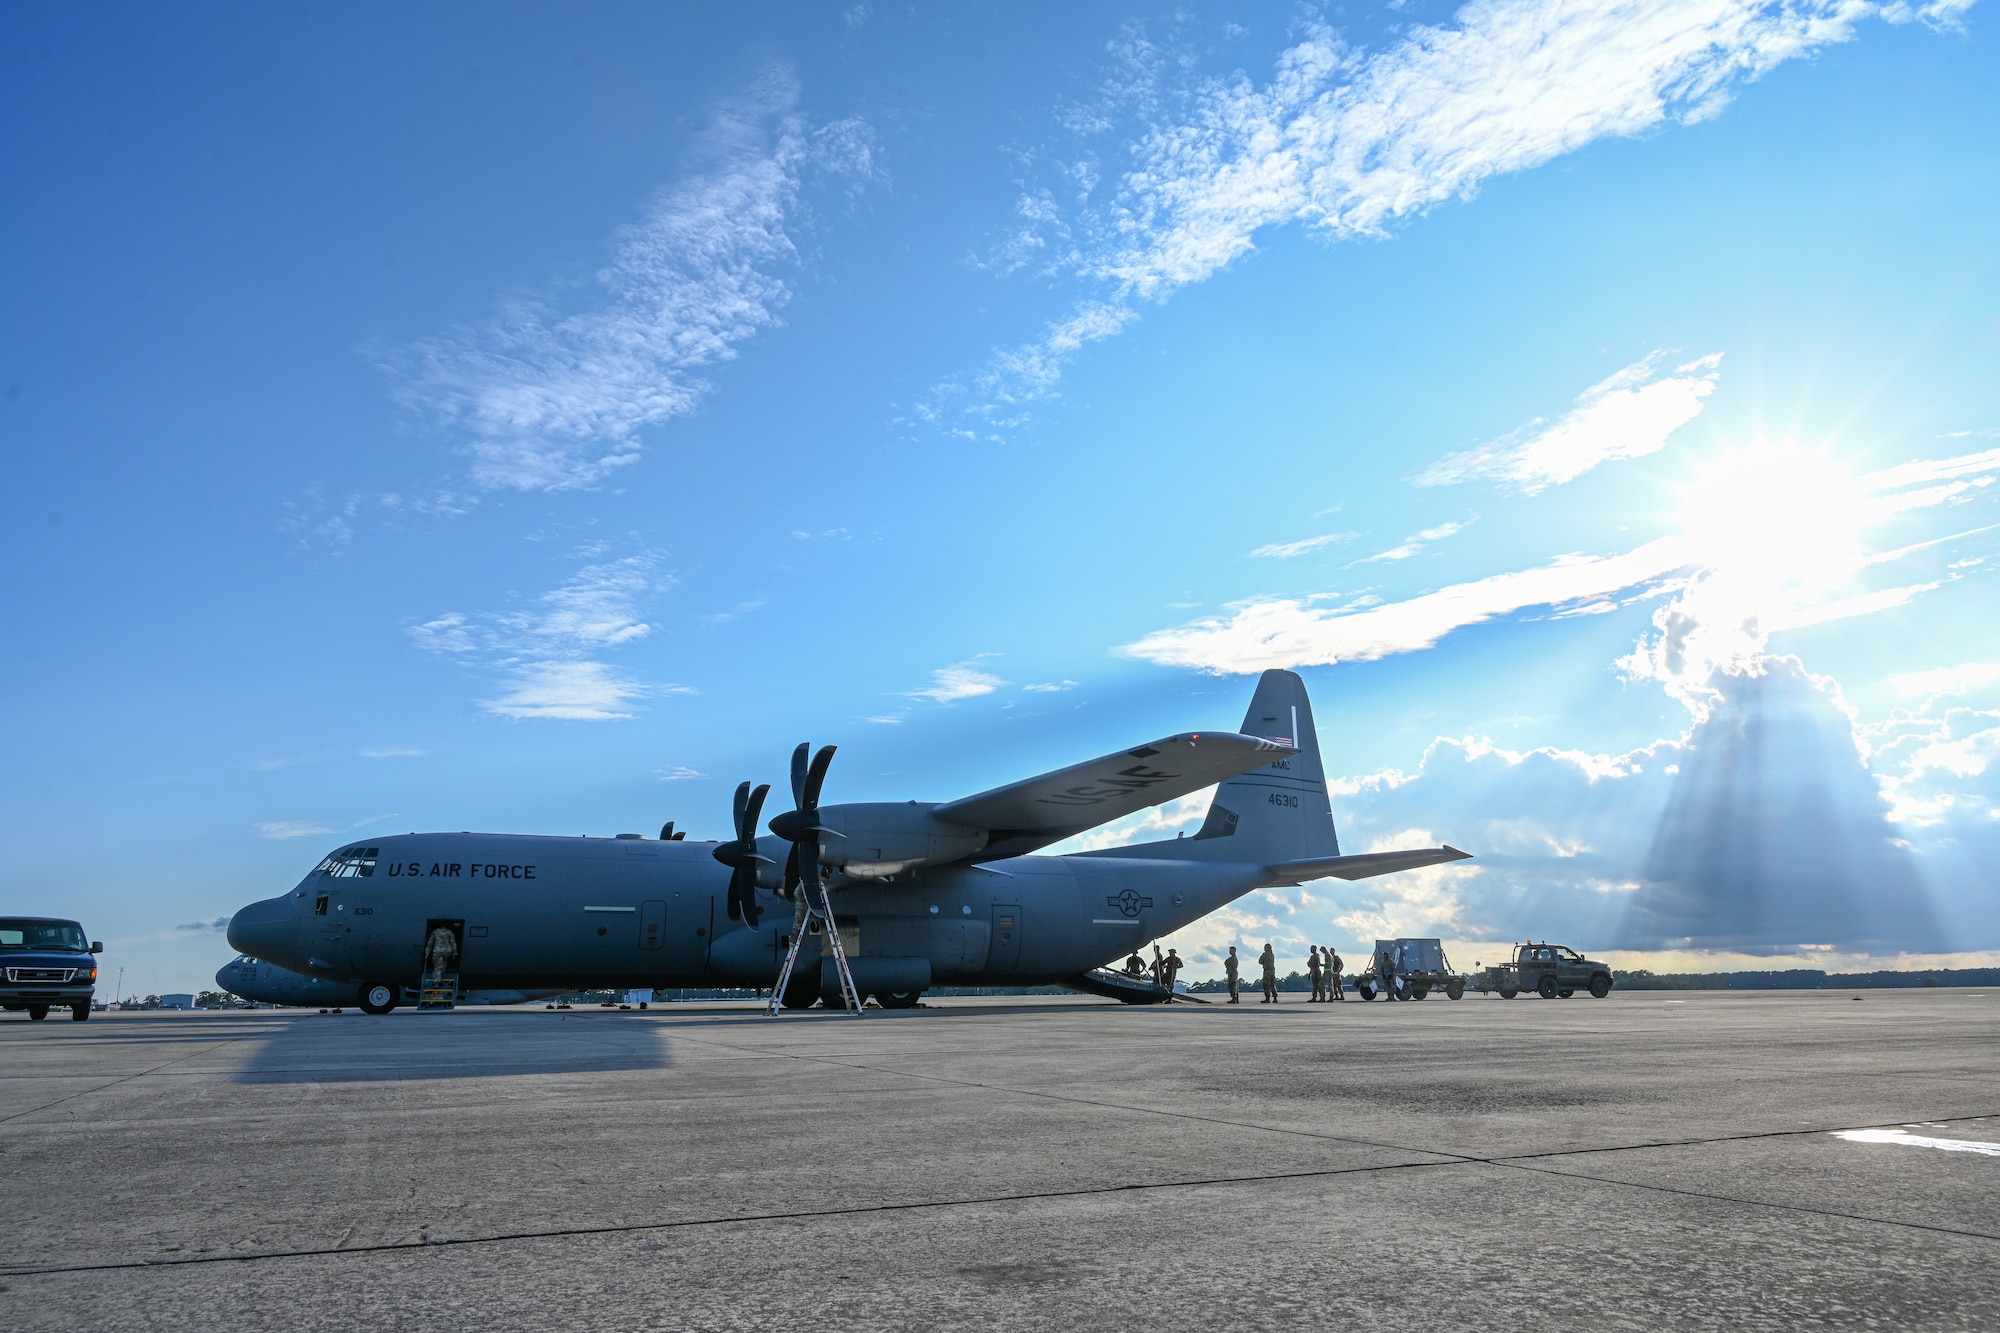 Airmen unload cargo from a C-130J Super Hercules during Razor Talon 23-1 at Marine Corps Air Station Cherry Point, North Carolina, July 24, 2023. RT-23 is an agile combat employment focused exercise, designed to test the 4th Fighter Wing’s ability to operate as a lead wing to generate combat airpower while continuing to move, maneuver, sustain the wing and subordinate force elements in a dynamic contested environment. (U.S. Air Force photo by Staff Sgt. Koby I. Saunders)